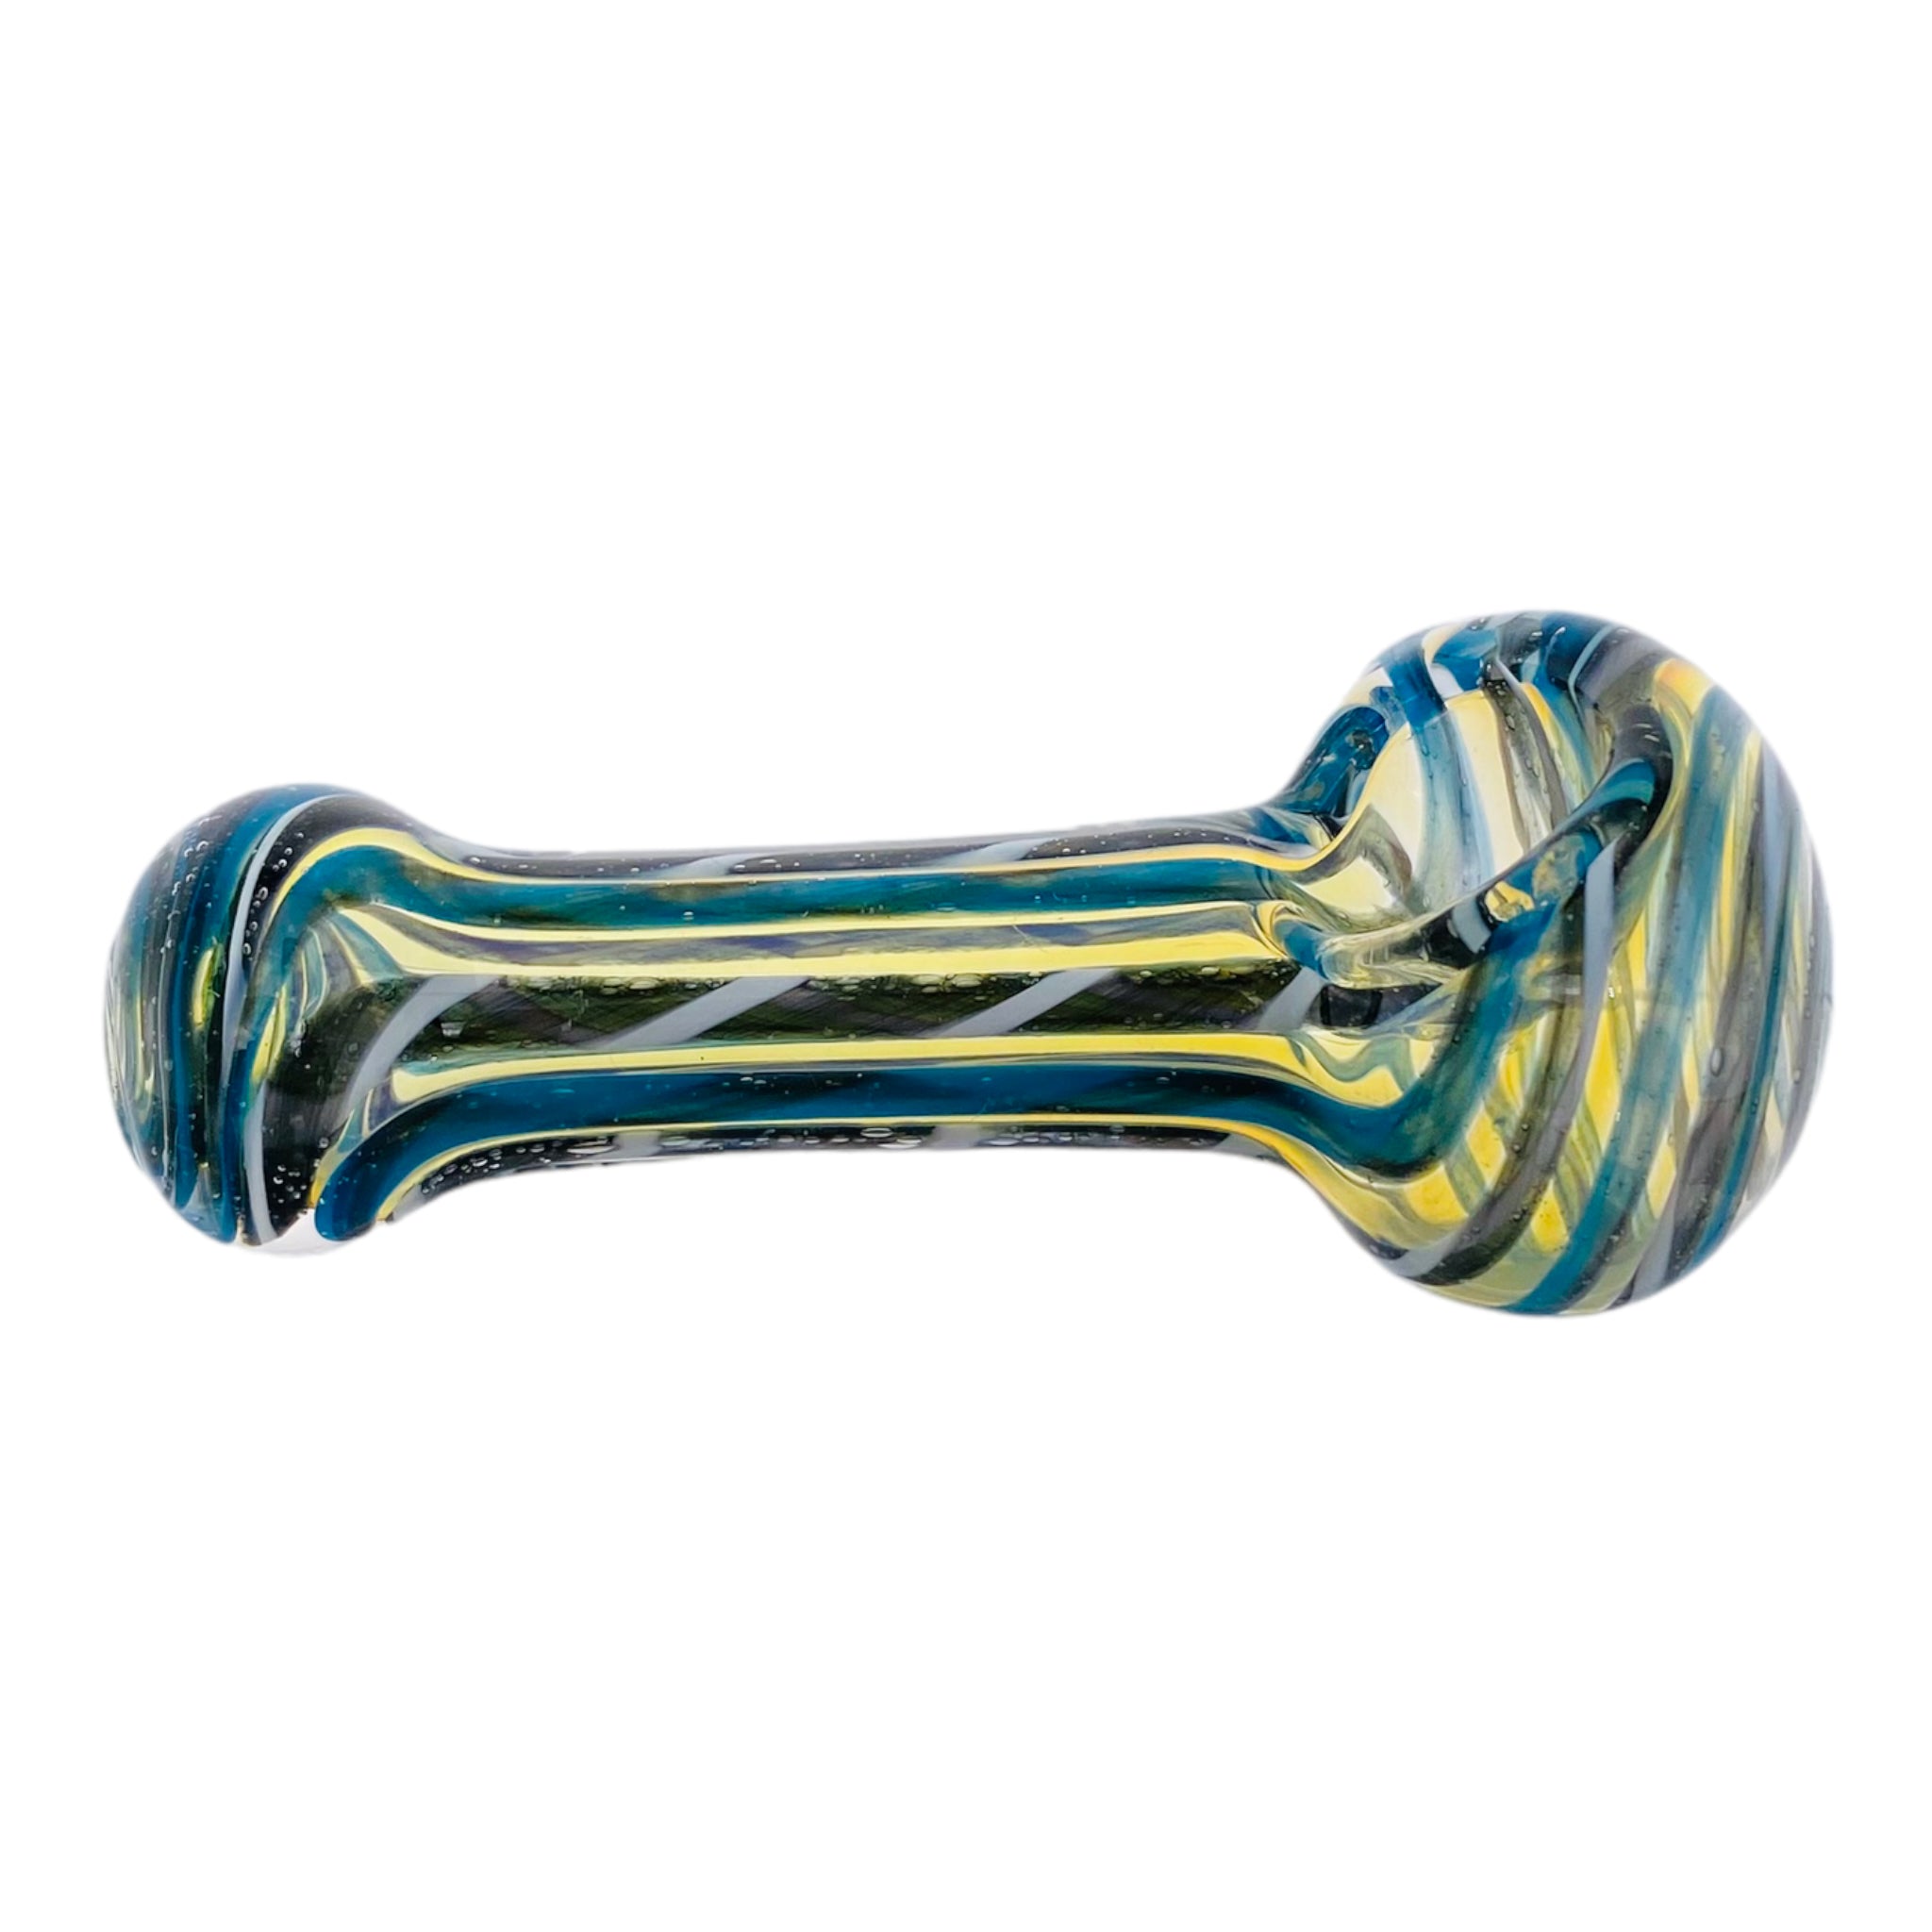 Basic Glass Spoon Pipe With Blue White And Black Linework